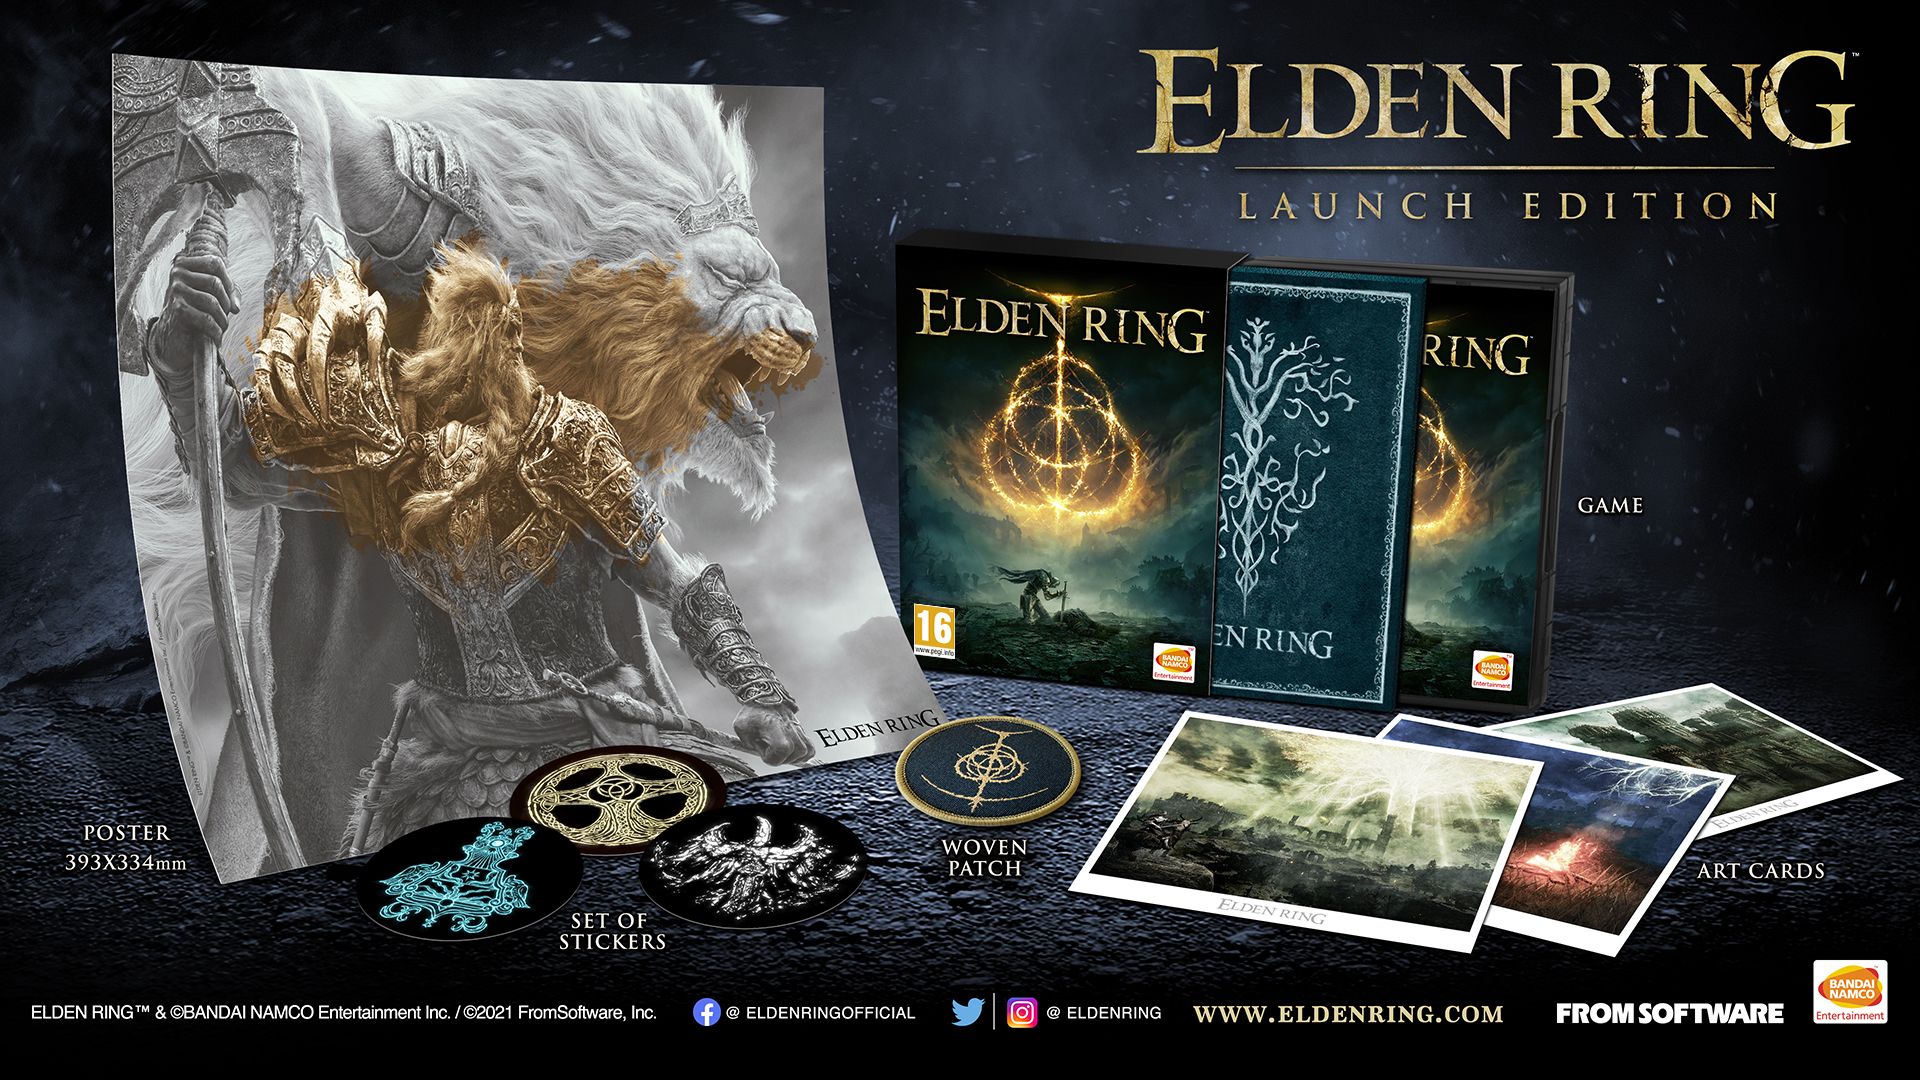 ELDEN RING LAUNCH EDITION [PS4] Store Bandai Namco ent.